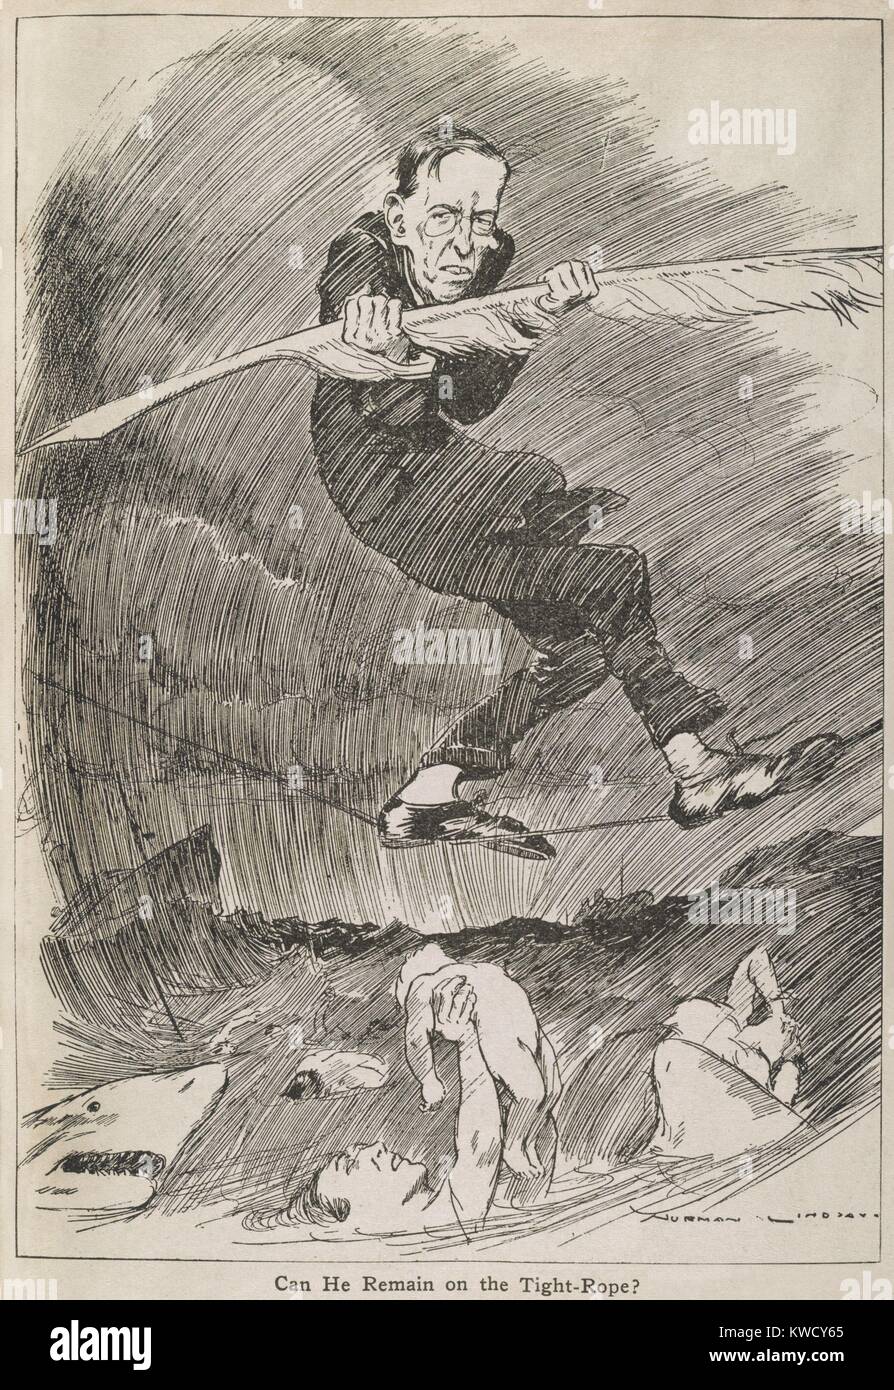 CAN HE REMAIN ON THE TIGHT-ROPE? President Woodrow Wilson balancing with a quill pen, on a tightrope over a shark infested Atlantic Ocean and victims of German submarine warfare. 1917 by Australian cartoonist, Norman Lindsay (BSLOC 2017 1 36) Stock Photo